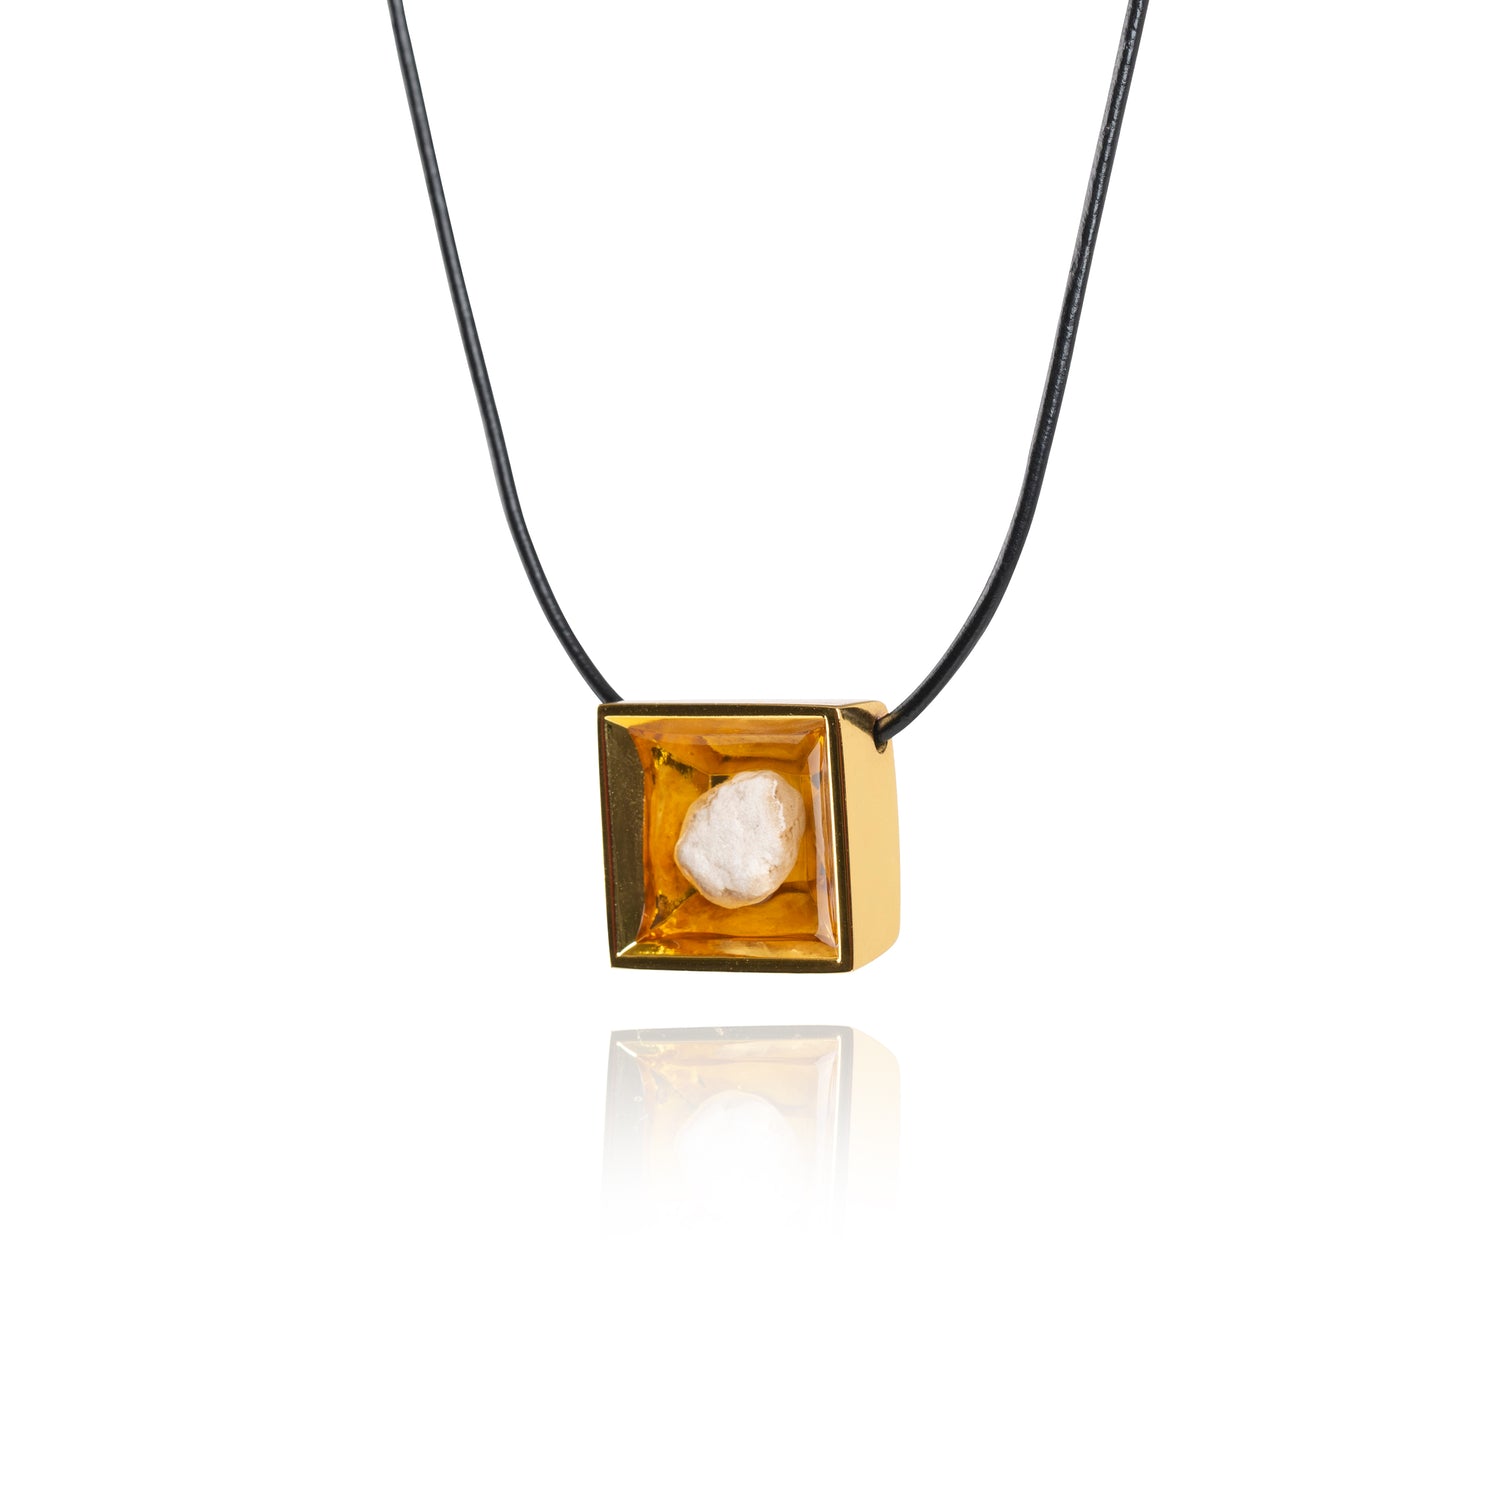 A side view of a small natural tan stone sitting in the middle of a square shaped metal pendant in a gold color. The pendant is hanging on a black leather necklace.